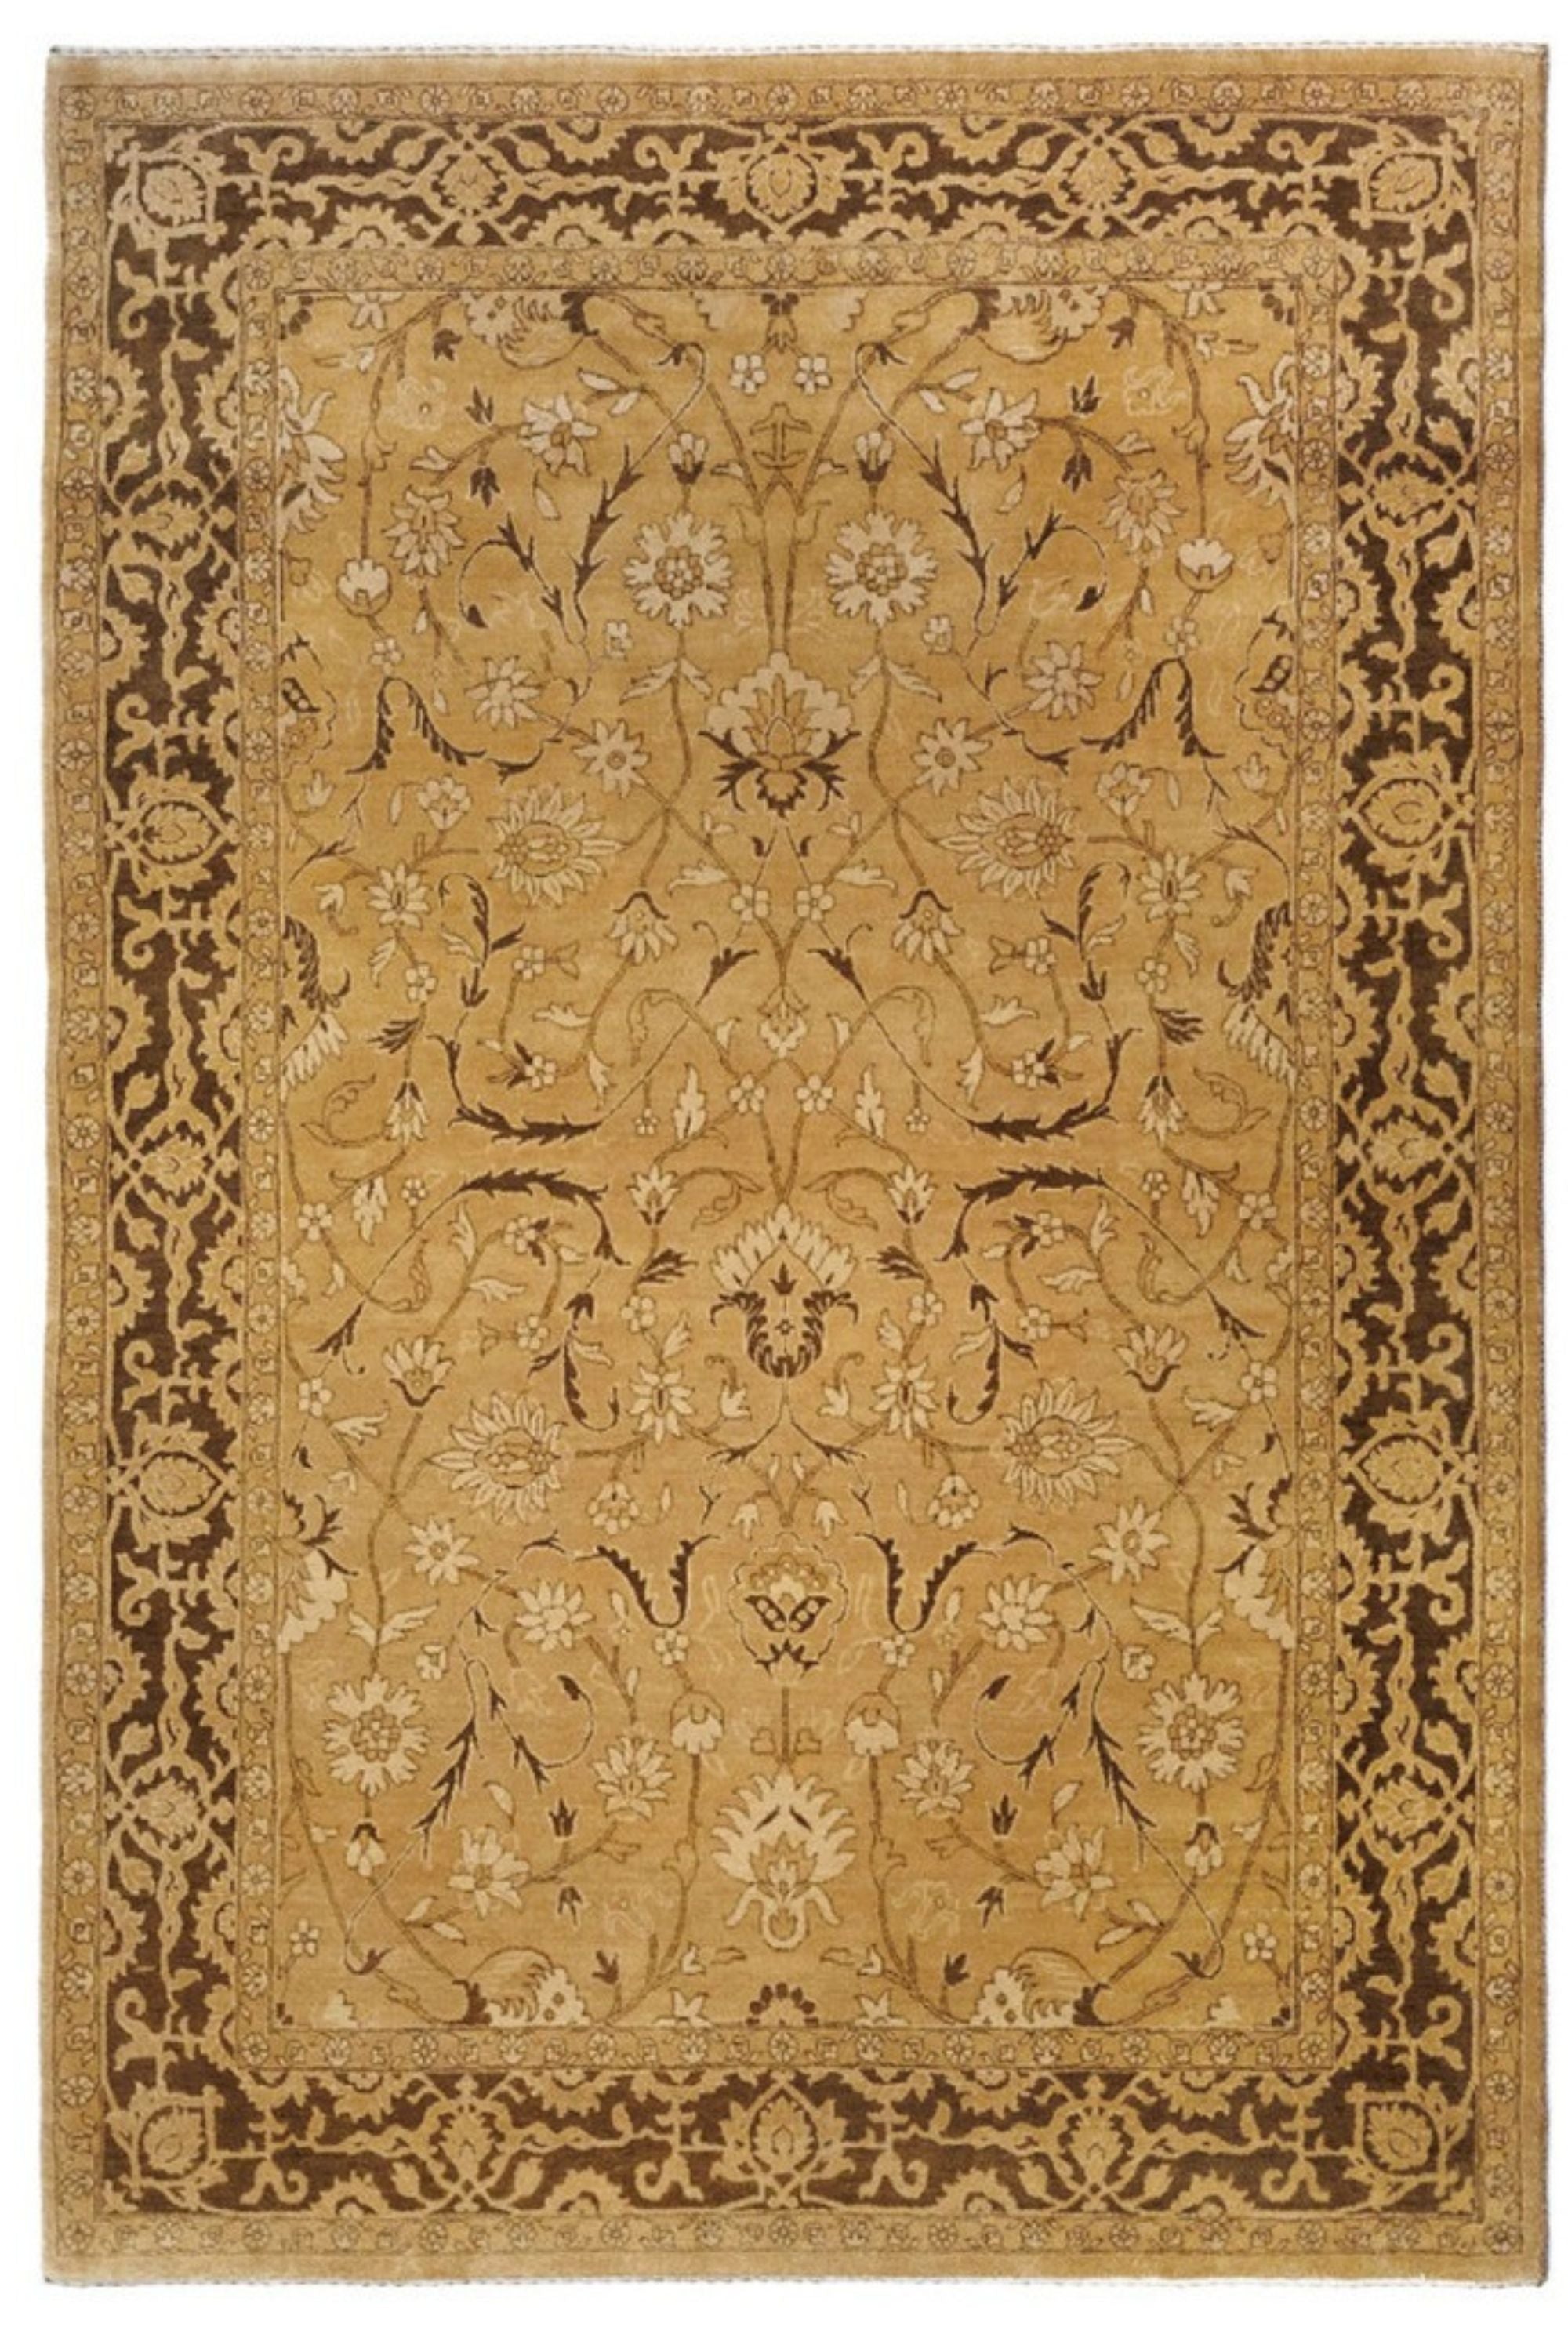 authentic oriental rug with delicate floral pattern in beige